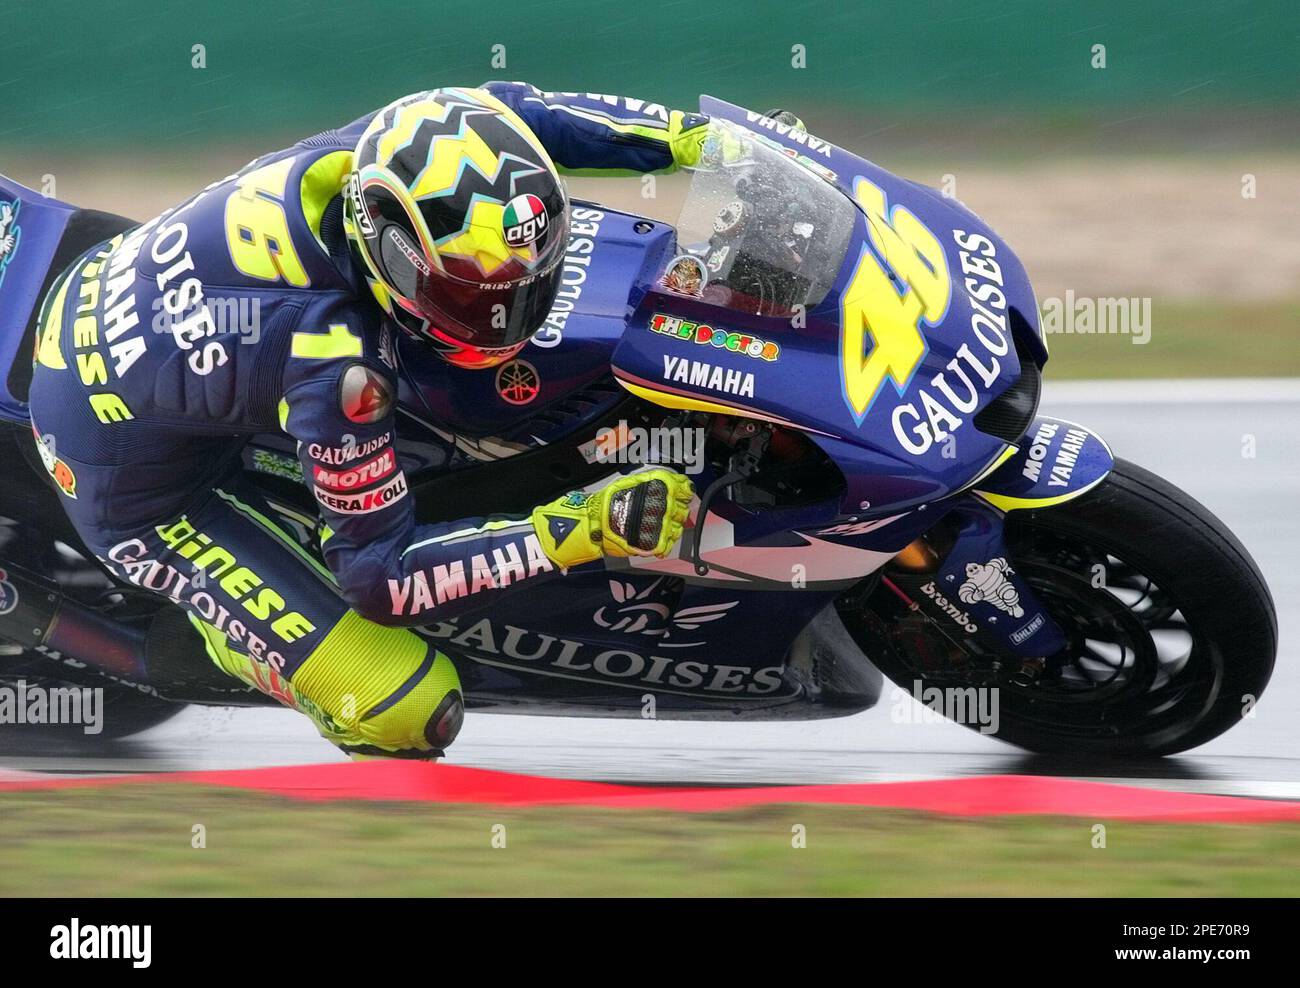 Italys Valentino Rossi takes on a Yamaha a turn on his way to win the MotoGP Chinese Grand Prix at Shanghai Sunday, May 1, 2005